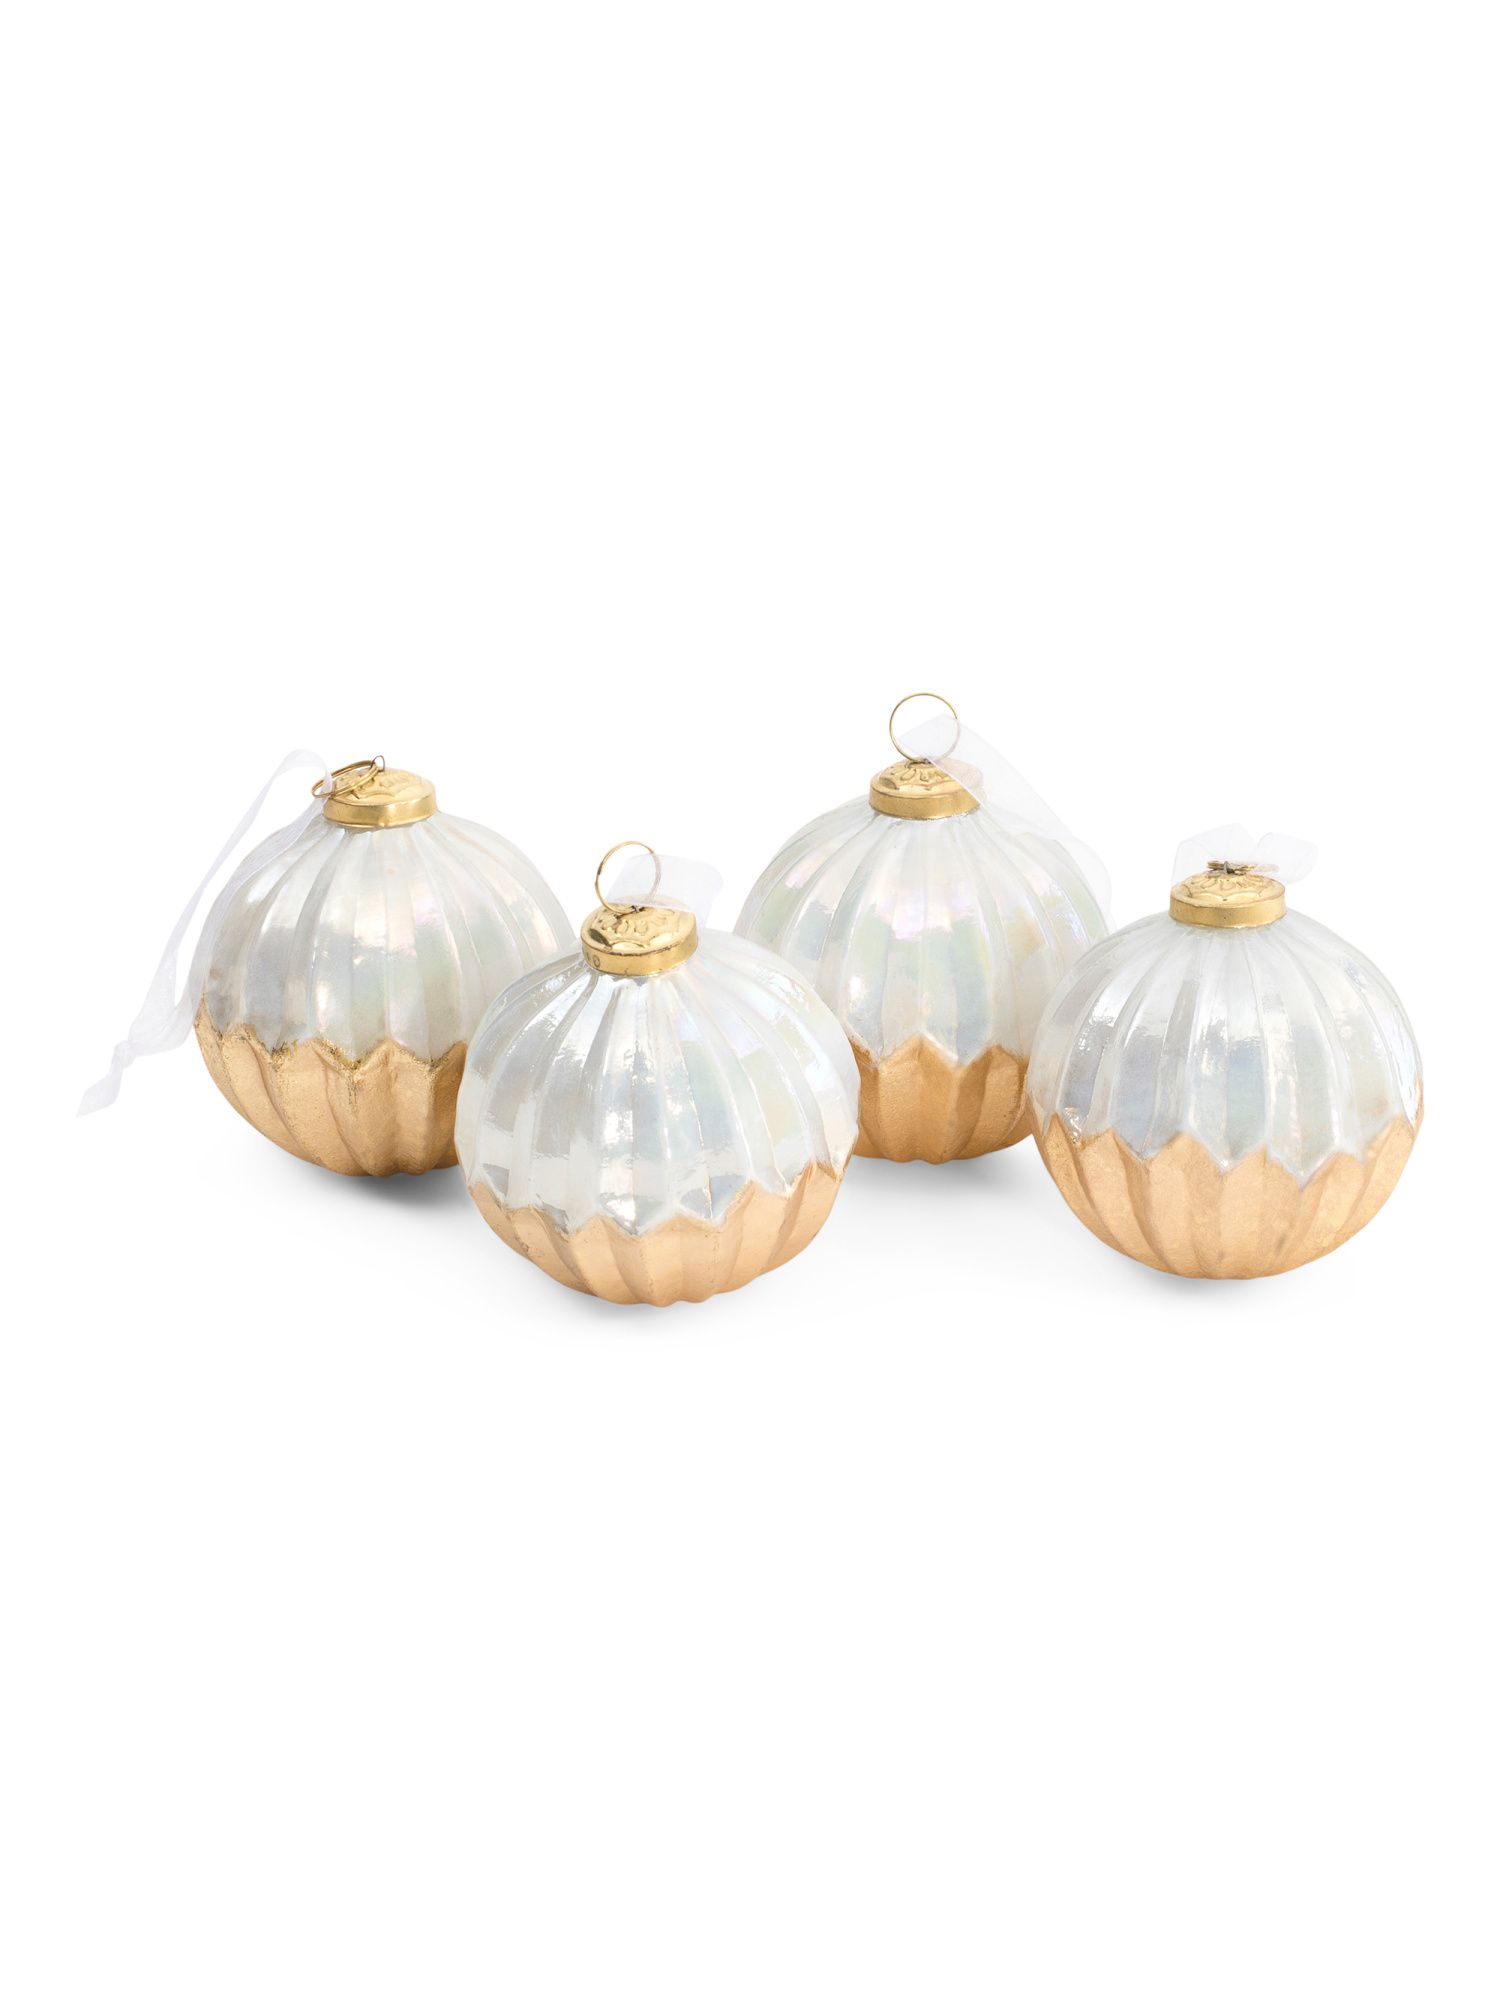 Set Of 4 4in Gold Tone Foil Ornaments | Pillows & Decor | Marshalls | Marshalls